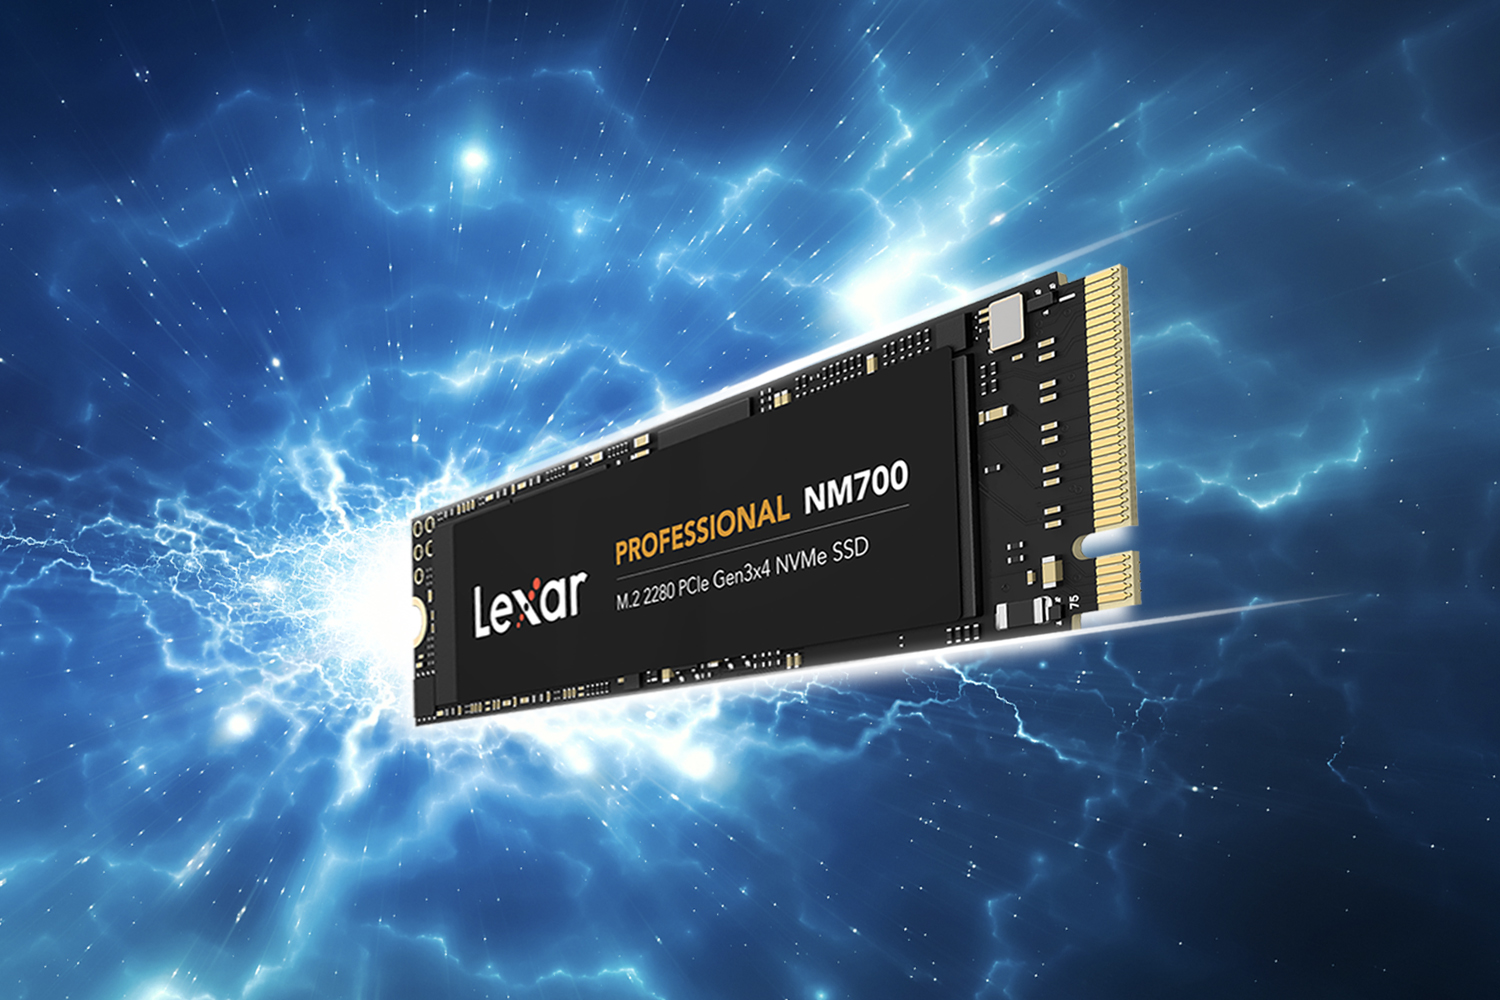 lexar professional NM700 M.2 2280 NVMe SSD device on bright blue, white lightning background